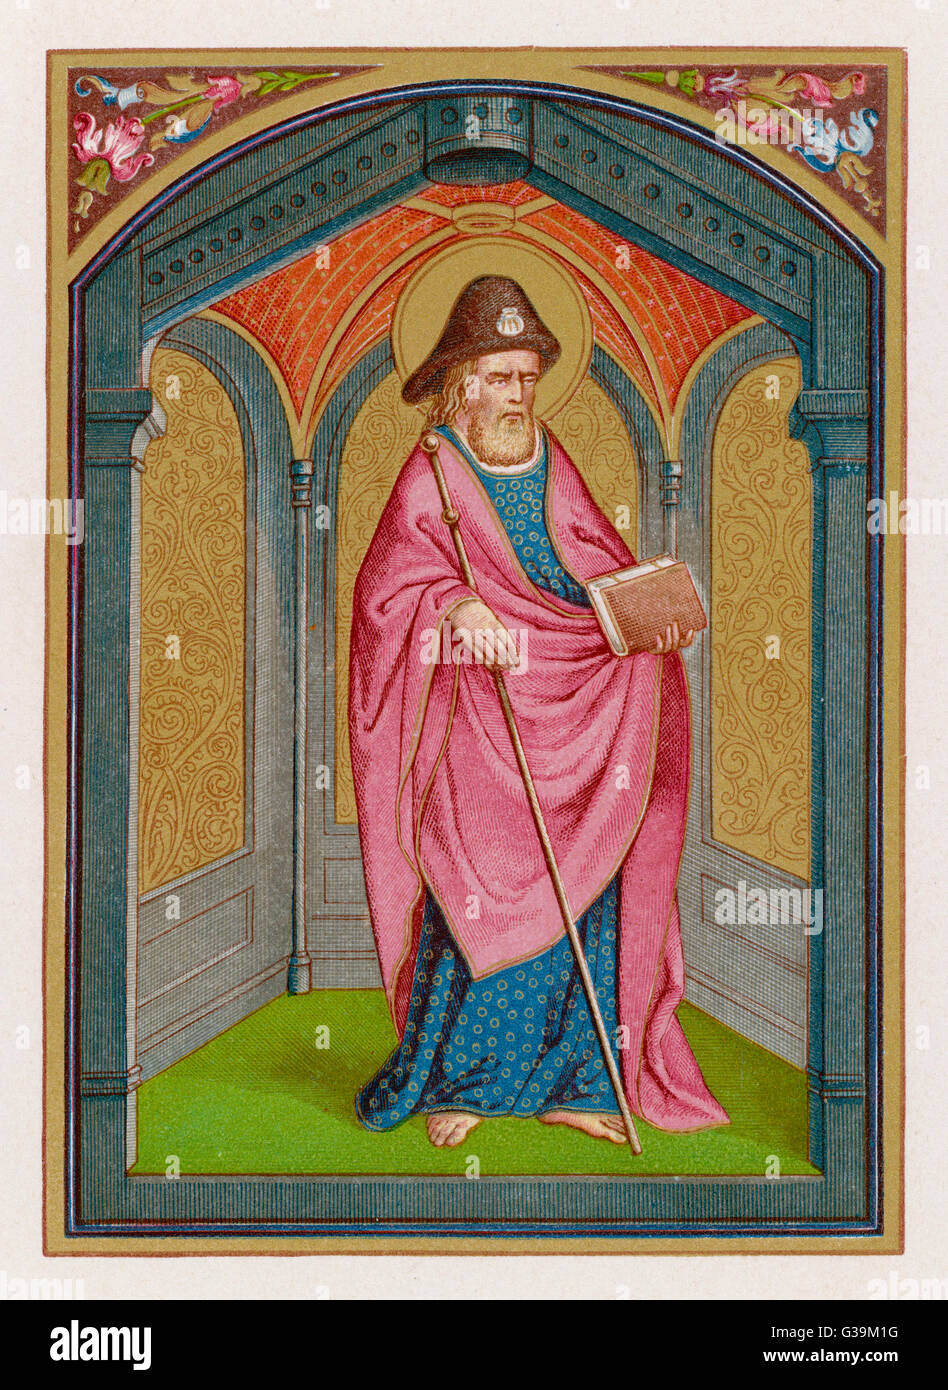 Saint James the Greater - Digital Collection